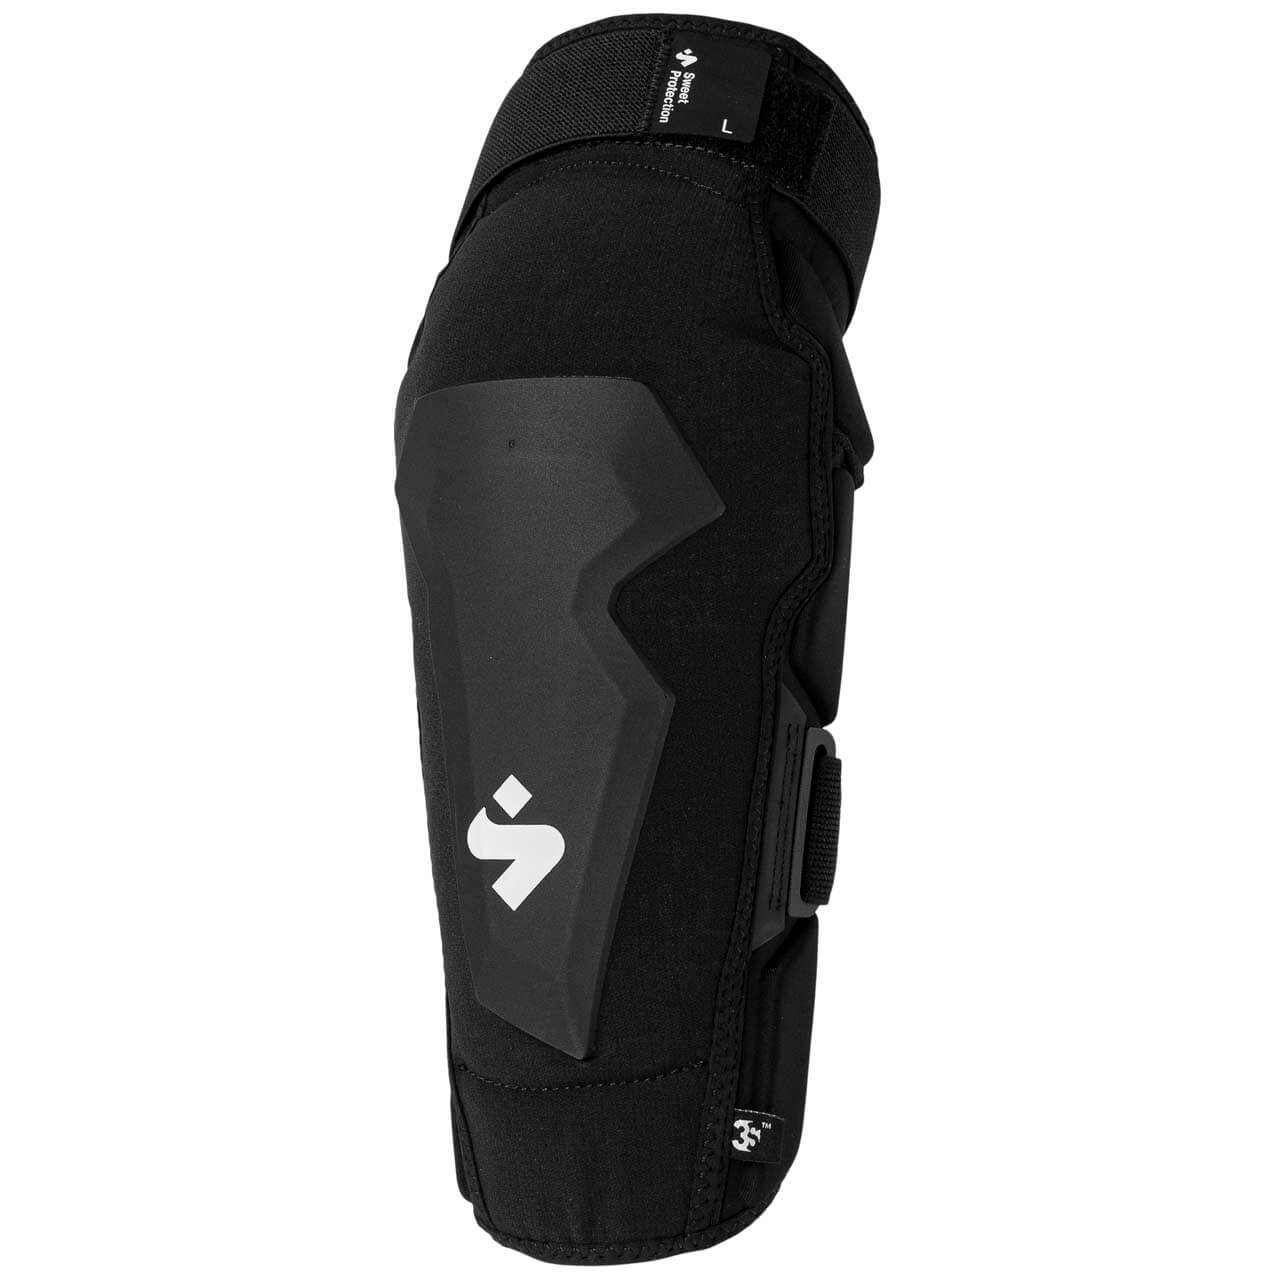 Sweet Protection Knee Guards Pro - Black, S